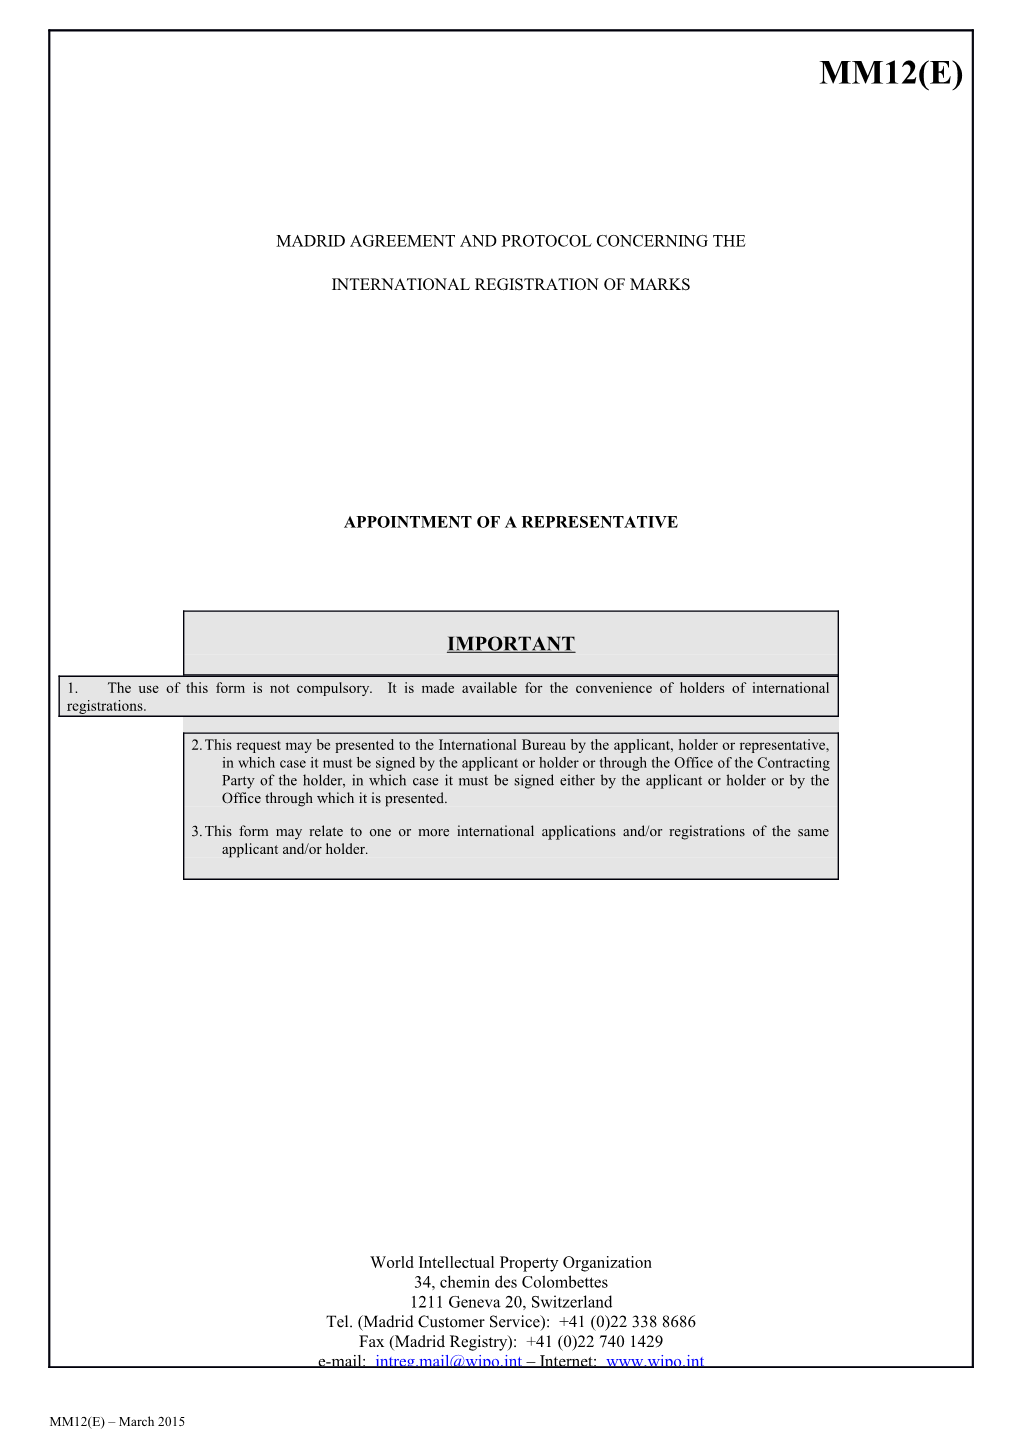 FORM/MM12 : Appointment of a Representative